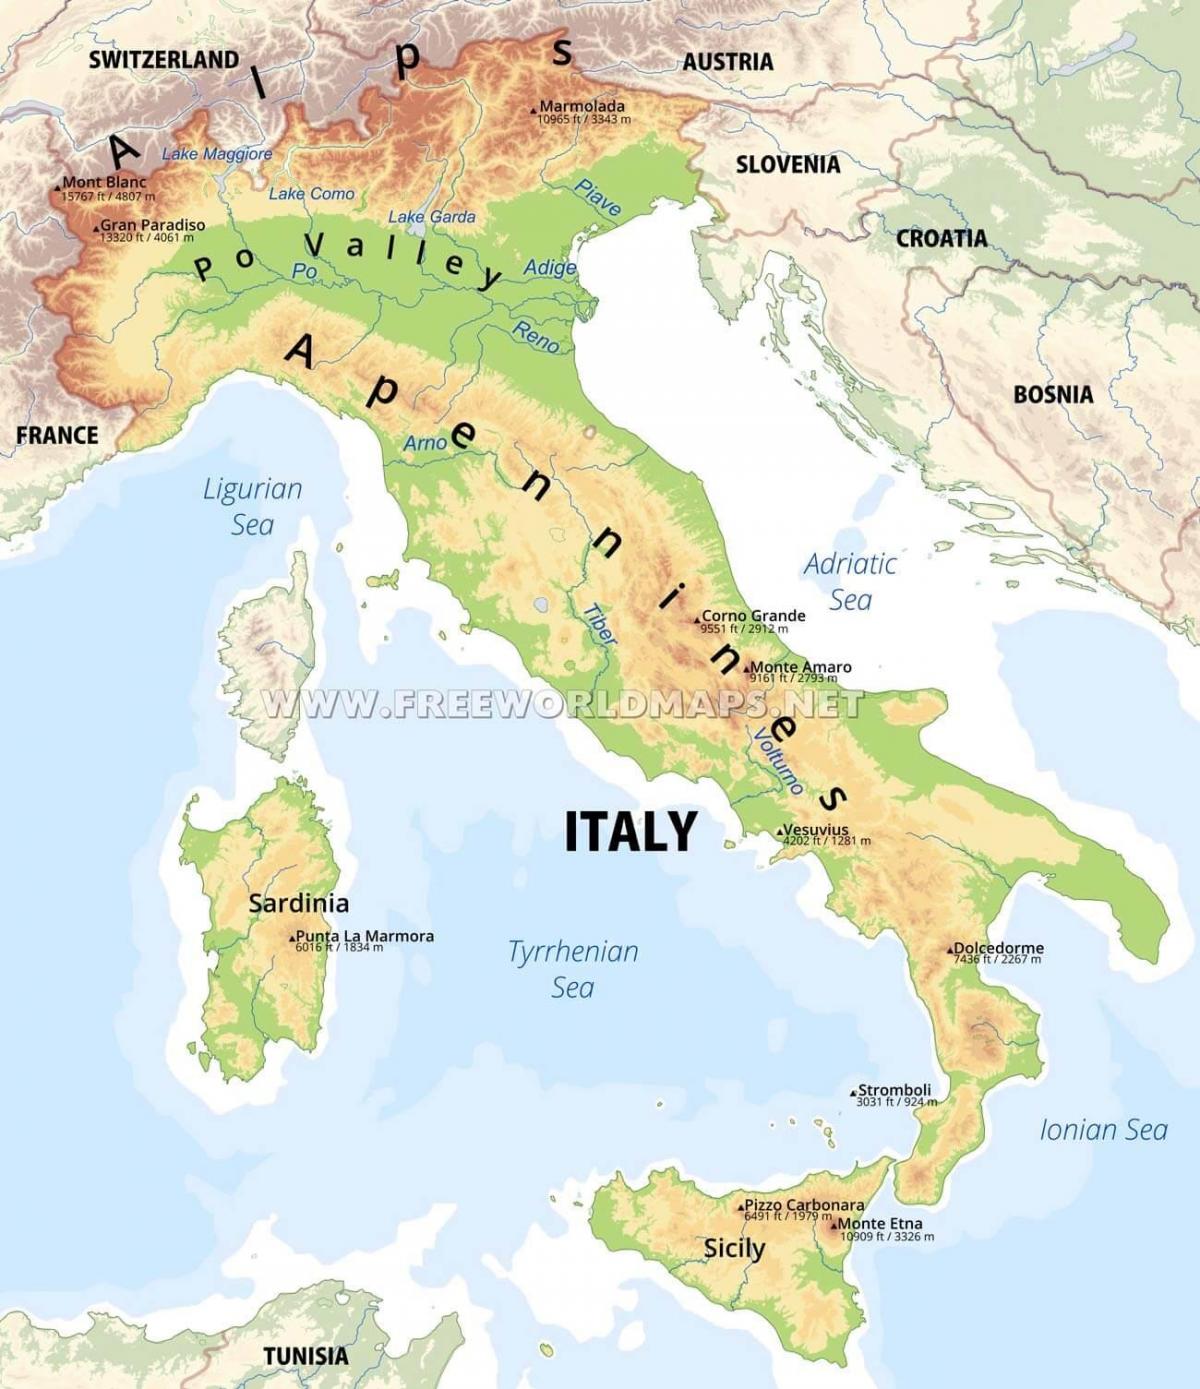 Italy physical features map